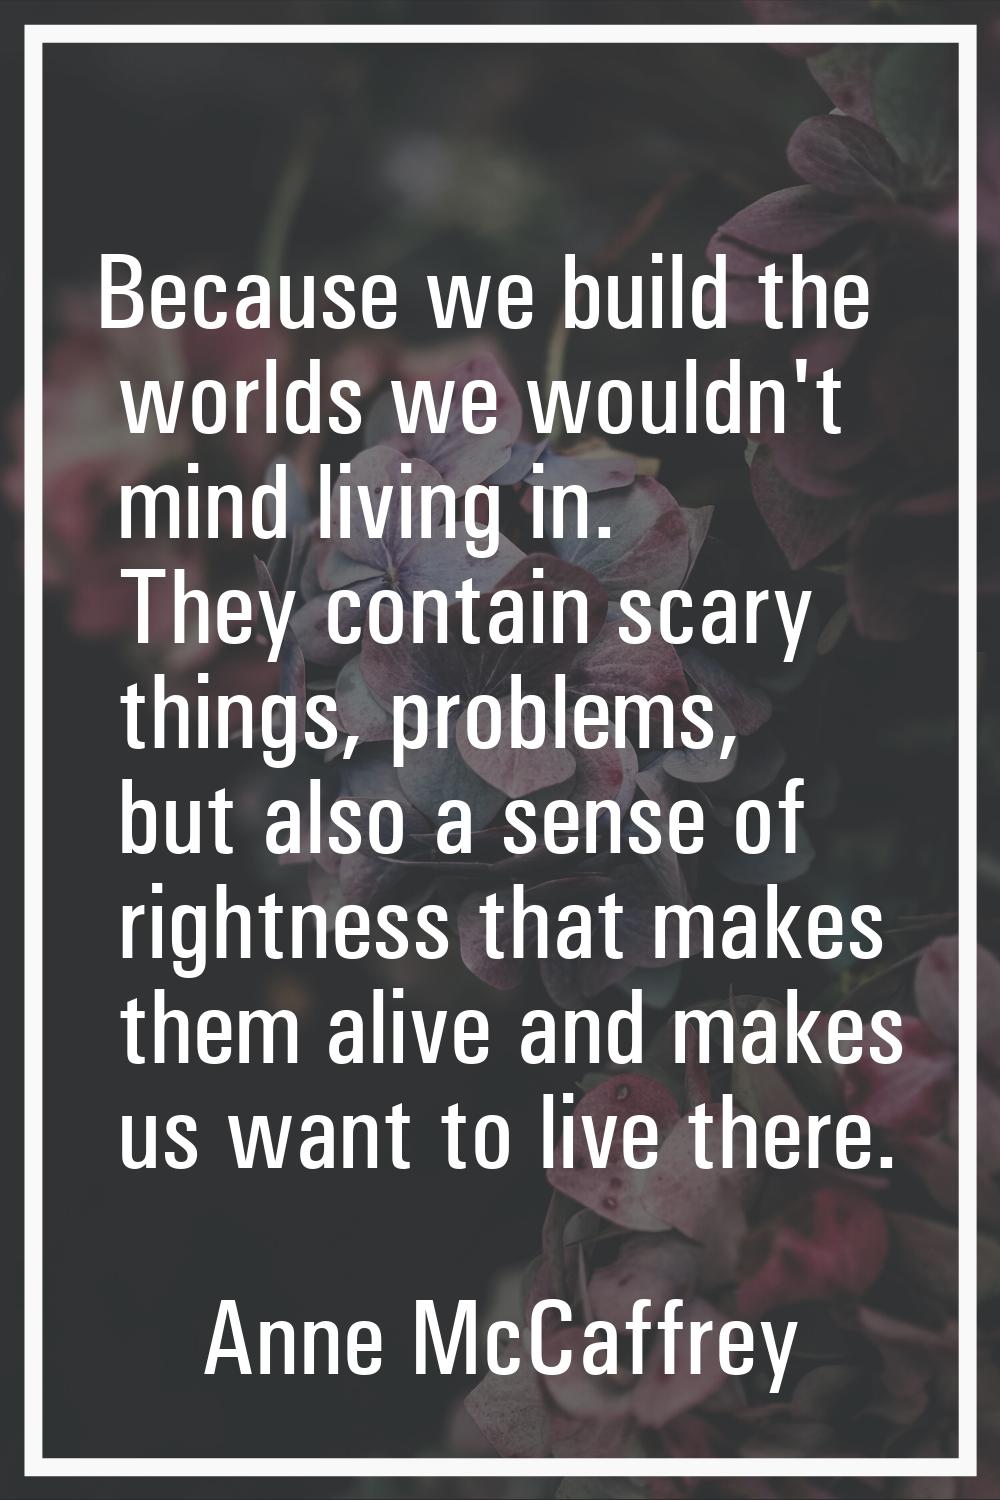 Because we build the worlds we wouldn't mind living in. They contain scary things, problems, but al